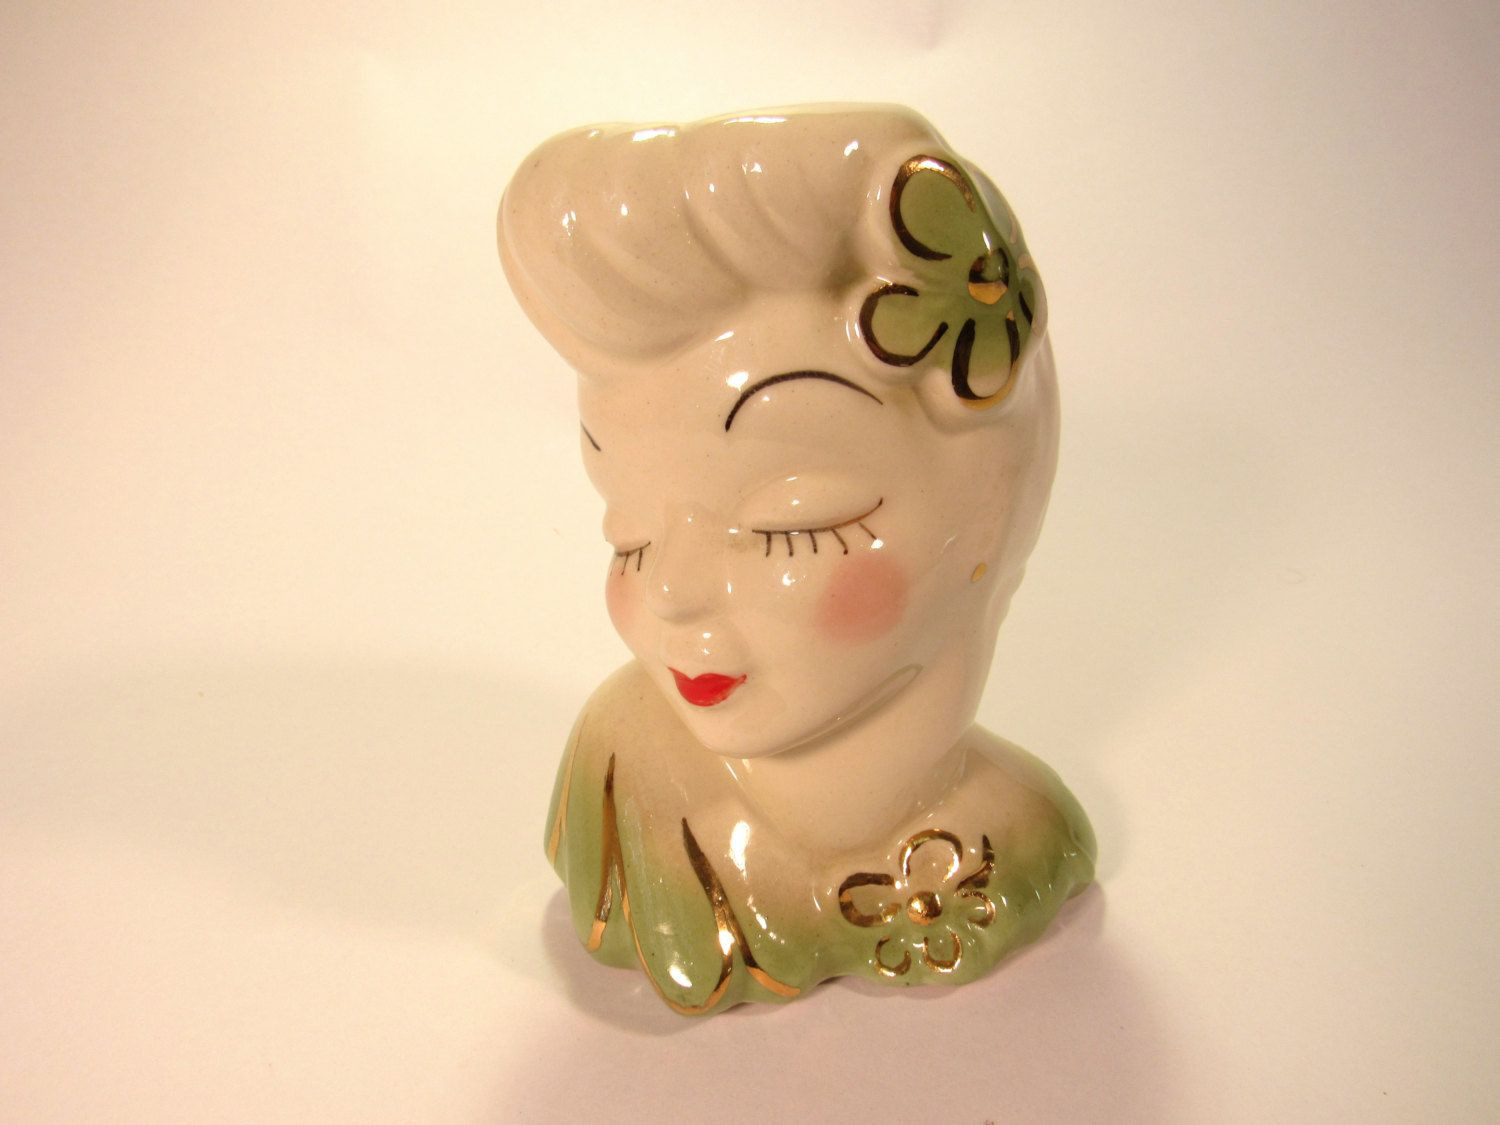 13 Unique Lady Head Vases 2024 free download lady head vases of glamour girl head vase green dress flower in hair red lips and for glamour girl head vase green dress flower in hair red lips and gold trim the vase is 6 tall and was made